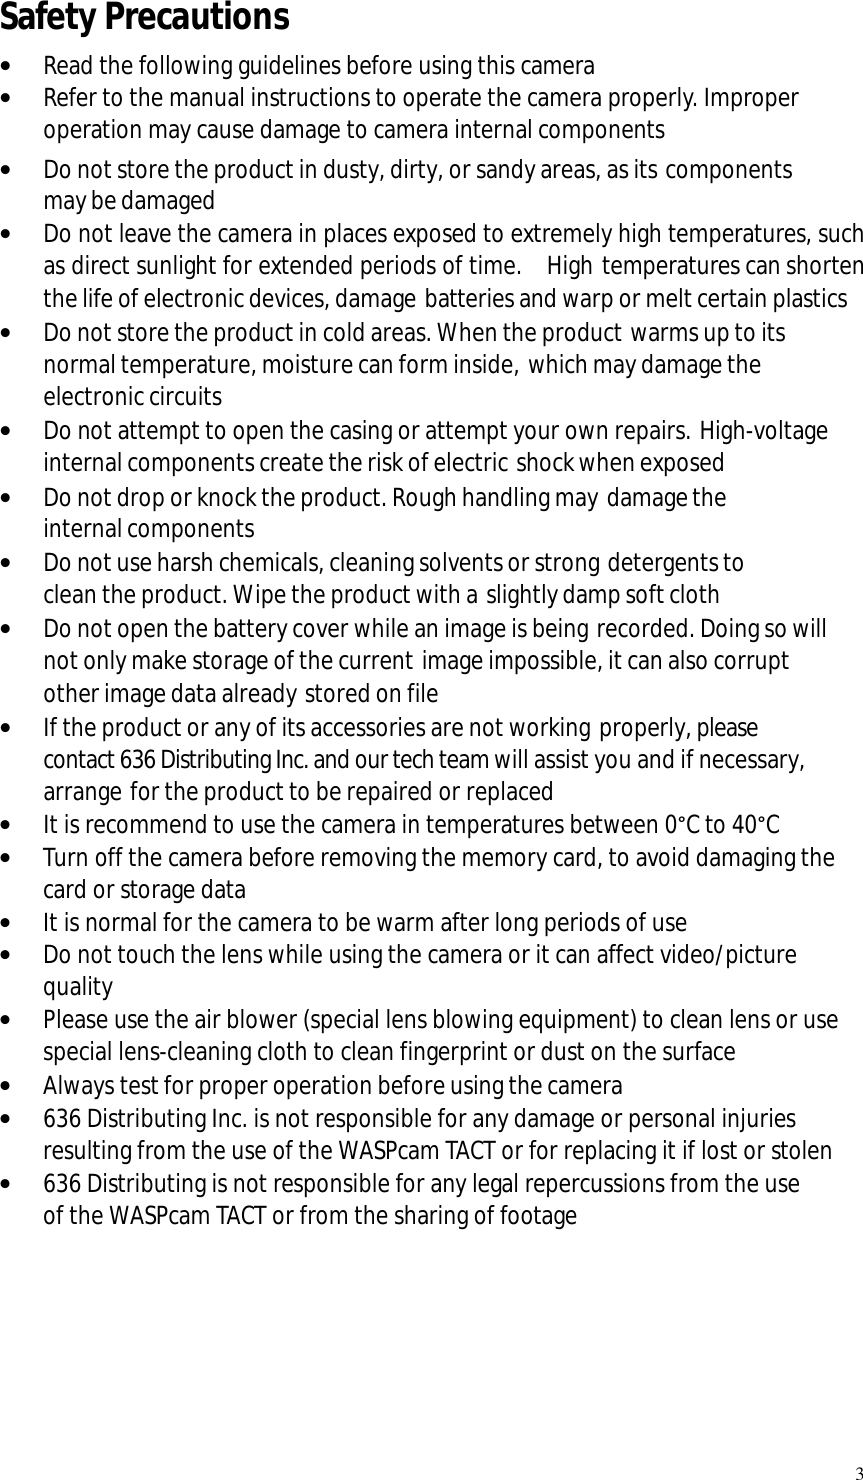   3 Safety Precautions · Read the following guidelines before using this camera · Refer to the manual instructions to operate the camera properly. Improper operation may cause damage to camera internal components · Do not store the product in dusty, dirty, or sandy areas, as its components may be damaged · Do not leave the camera in places exposed to extremely high temperatures, such as direct sunlight for extended periods of time.  High temperatures can shorten the life of electronic devices, damage batteries and warp or melt certain plastics · Do not store the product in cold areas. When the product warms up to its normal temperature, moisture can form inside, which may damage the electronic circuits · Do not attempt to open the casing or attempt your own repairs. High-voltage internal components create the risk of electric shock when exposed · Do not drop or knock the product. Rough handling may damage the internal components · Do not use harsh chemicals, cleaning solvents or strong detergents to clean the product. Wipe the product with a slightly damp soft cloth · Do not open the battery cover while an image is being recorded. Doing so will not only make storage of the current image impossible, it can also corrupt other image data already stored on file · If the product or any of its accessories are not working properly, please contact 636 Distributing Inc. and our tech team will assist you and if necessary, arrange for the product to be repaired or replaced · It is recommend to use the camera in temperatures between 0°C to 40°C · Turn off the camera before removing the memory card, to avoid damaging the card or storage data · It is normal for the camera to be warm after long periods of use  · Do not touch the lens while using the camera or it can affect video/picture quality · Please use the air blower (special lens blowing equipment) to clean lens or use special lens-cleaning cloth to clean fingerprint or dust on the surface · Always test for proper operation before using the camera · 636 Distributing Inc. is not responsible for any damage or personal injuries resulting from the use of the WASPcam TACT or for replacing it if lost or stolen · 636 Distributing is not responsible for any legal repercussions from the use of the WASPcam TACT or from the sharing of footage      